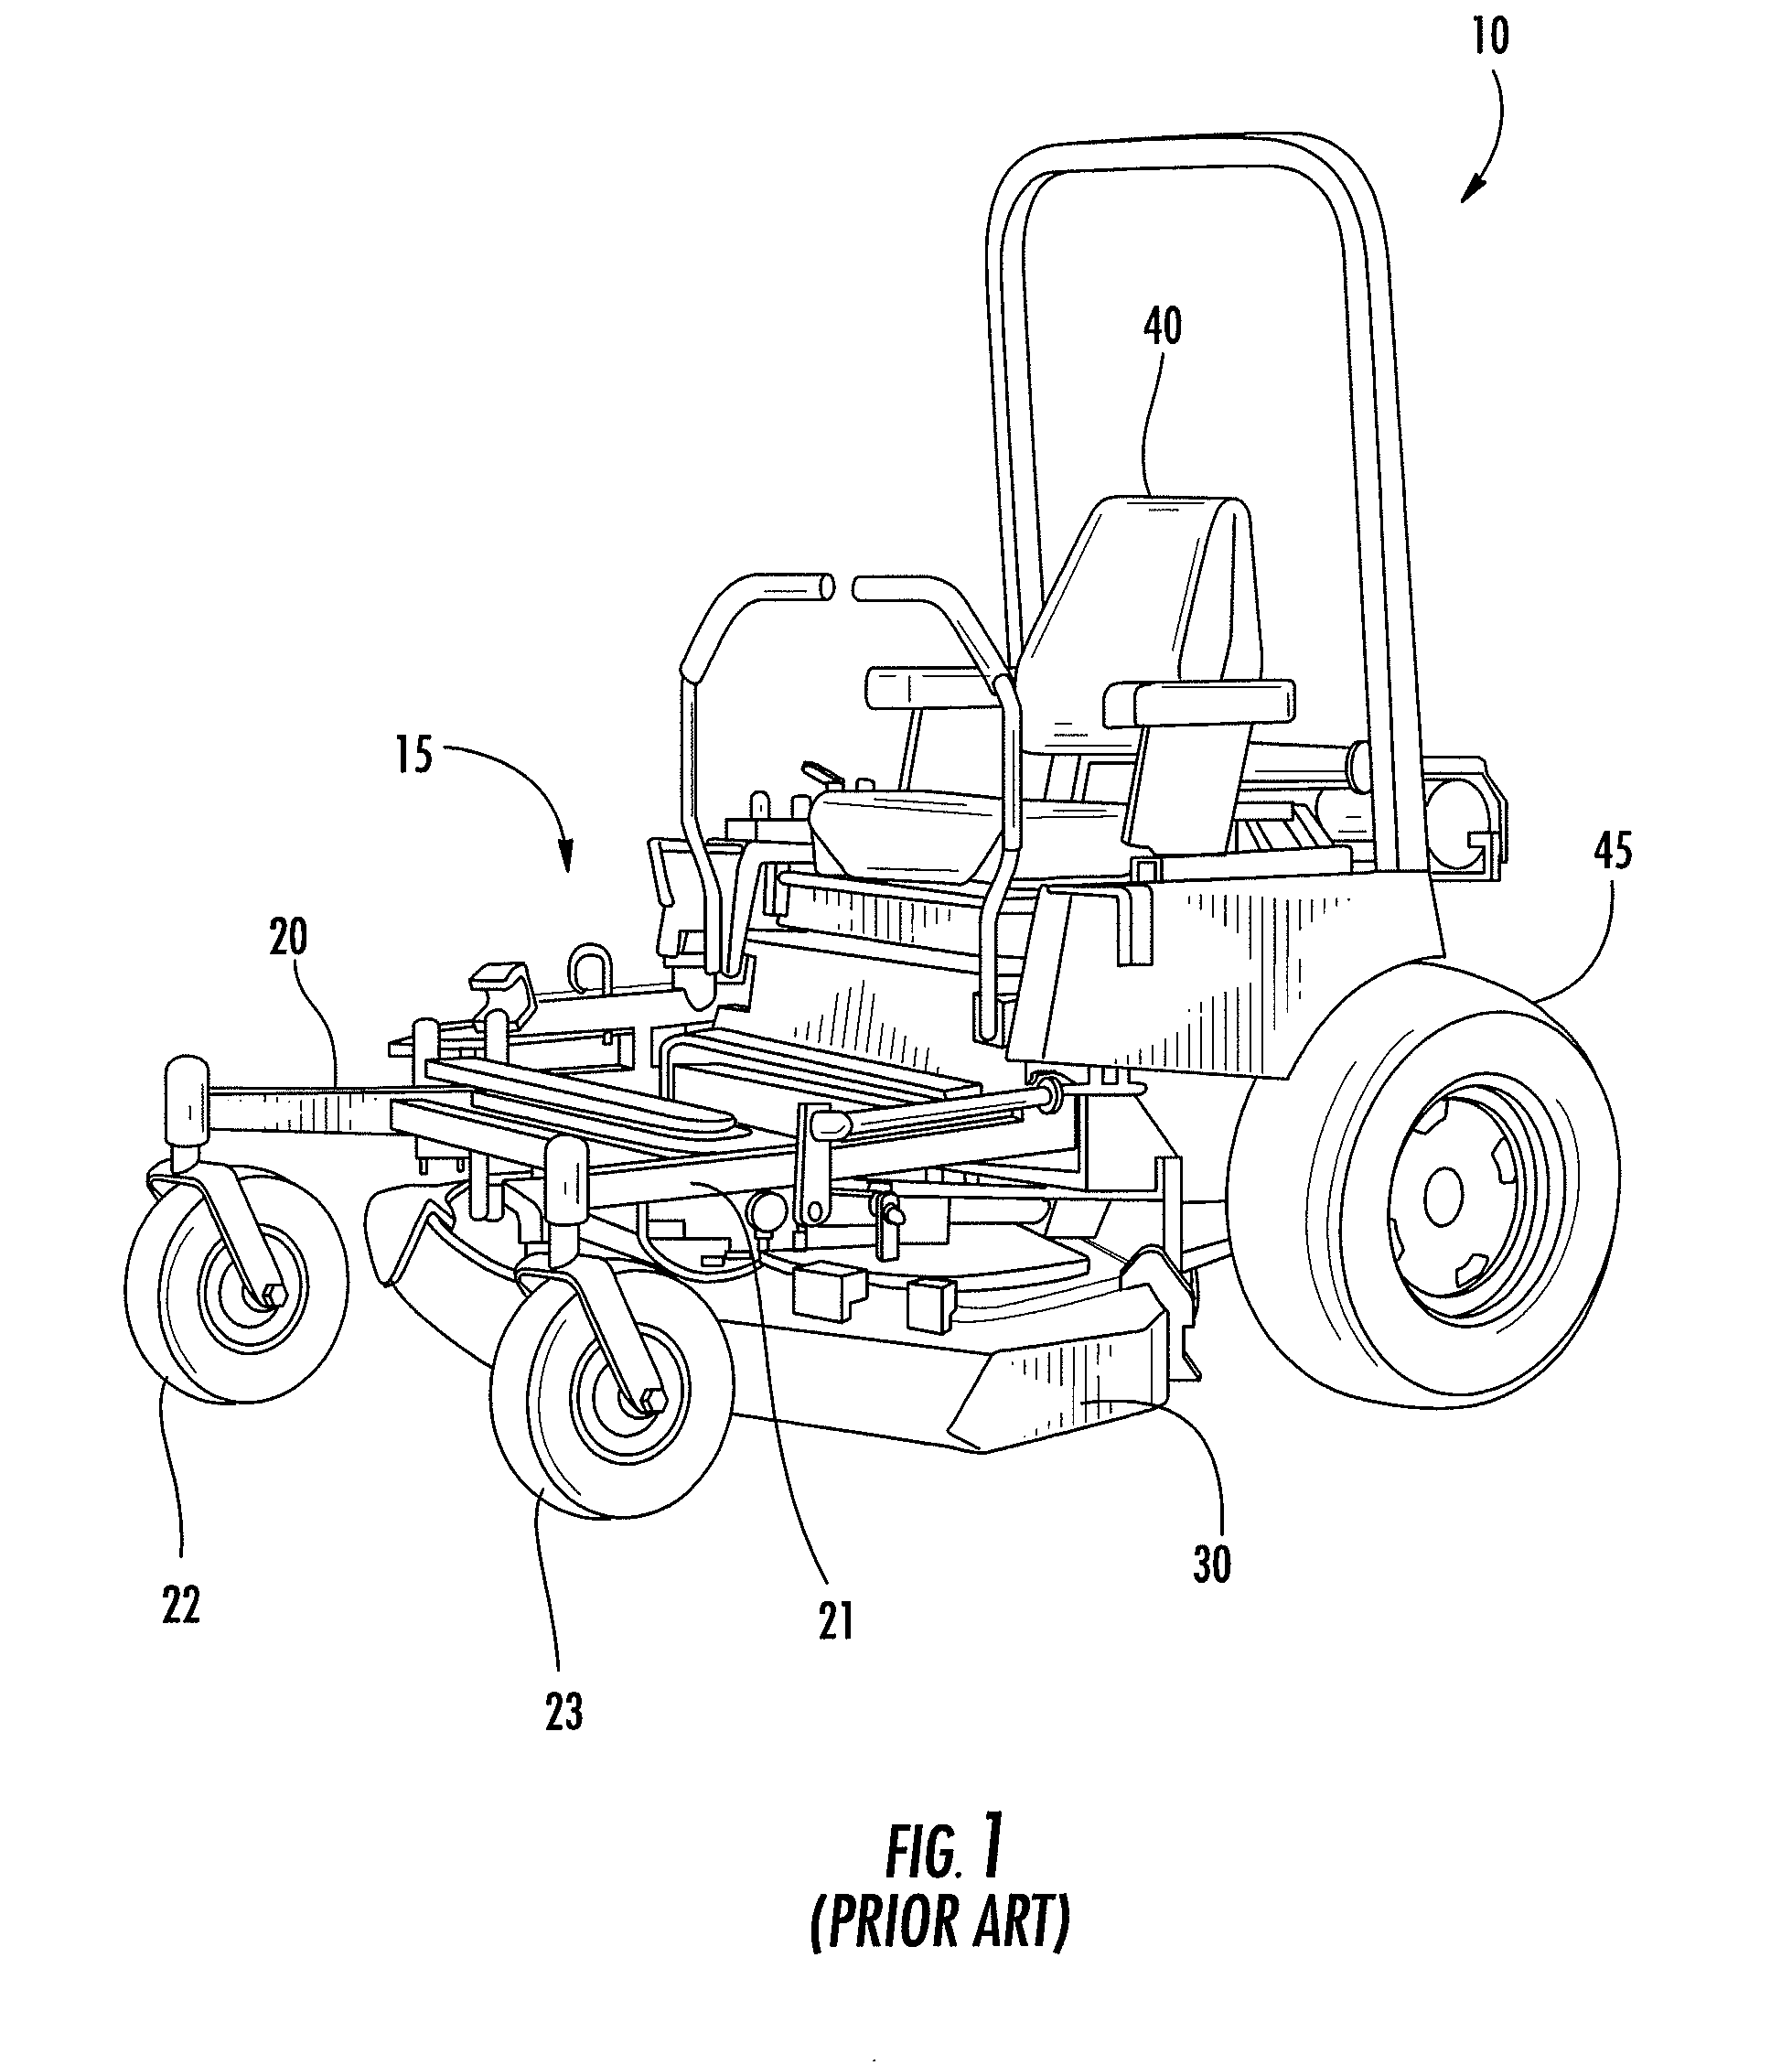 Mower payload bin and support structure